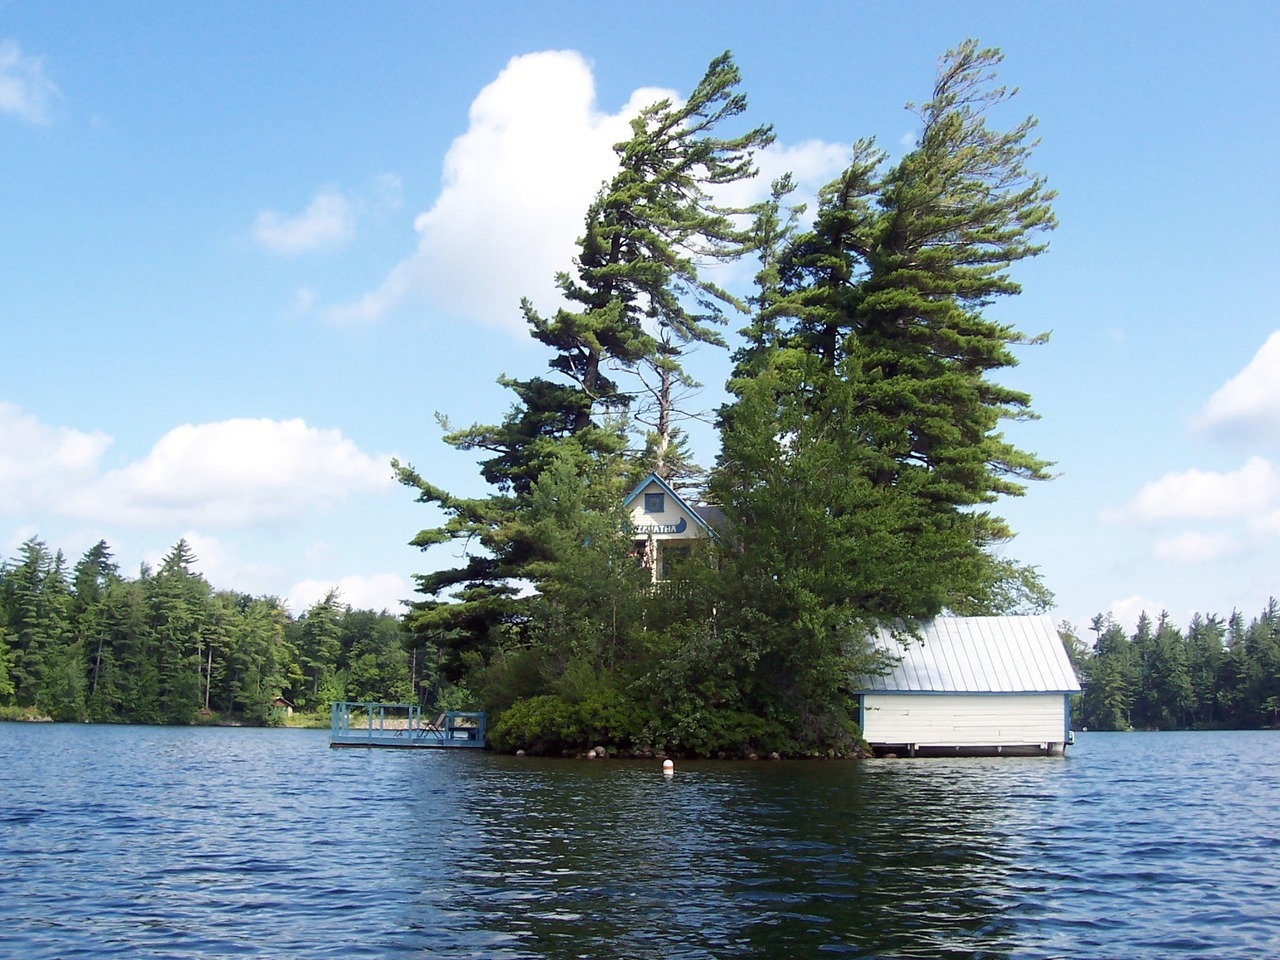 Camp Hiawatha and boathouse on Star Lake, New York
Submitted by Joe DaBoll-Lavoie / @jdaboll6